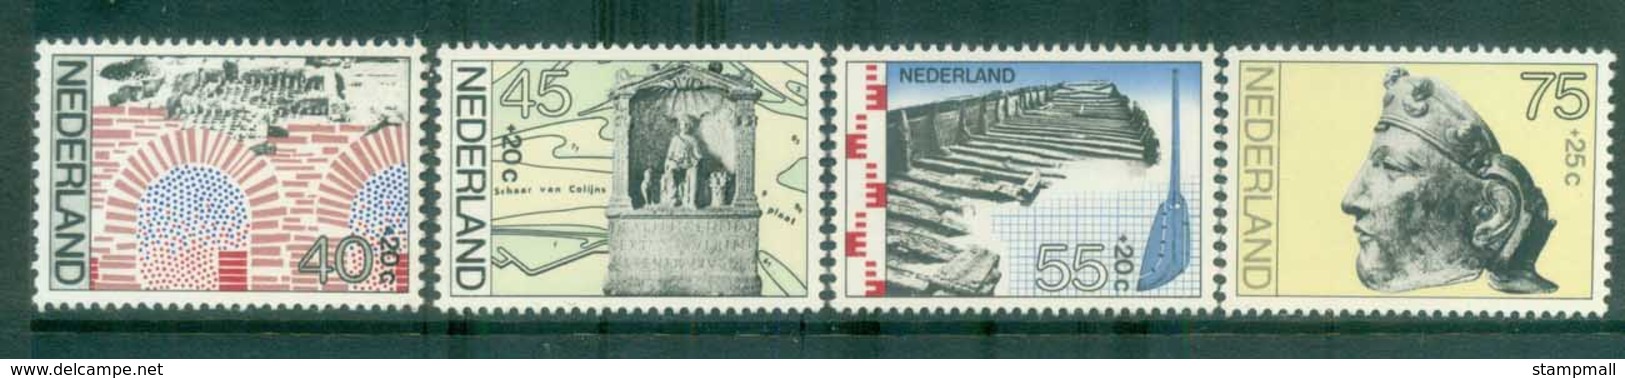 Netherlands 1977 Charity, Social & Cultural Purposes, Roman Architecture MUH Lot76586 - Unclassified